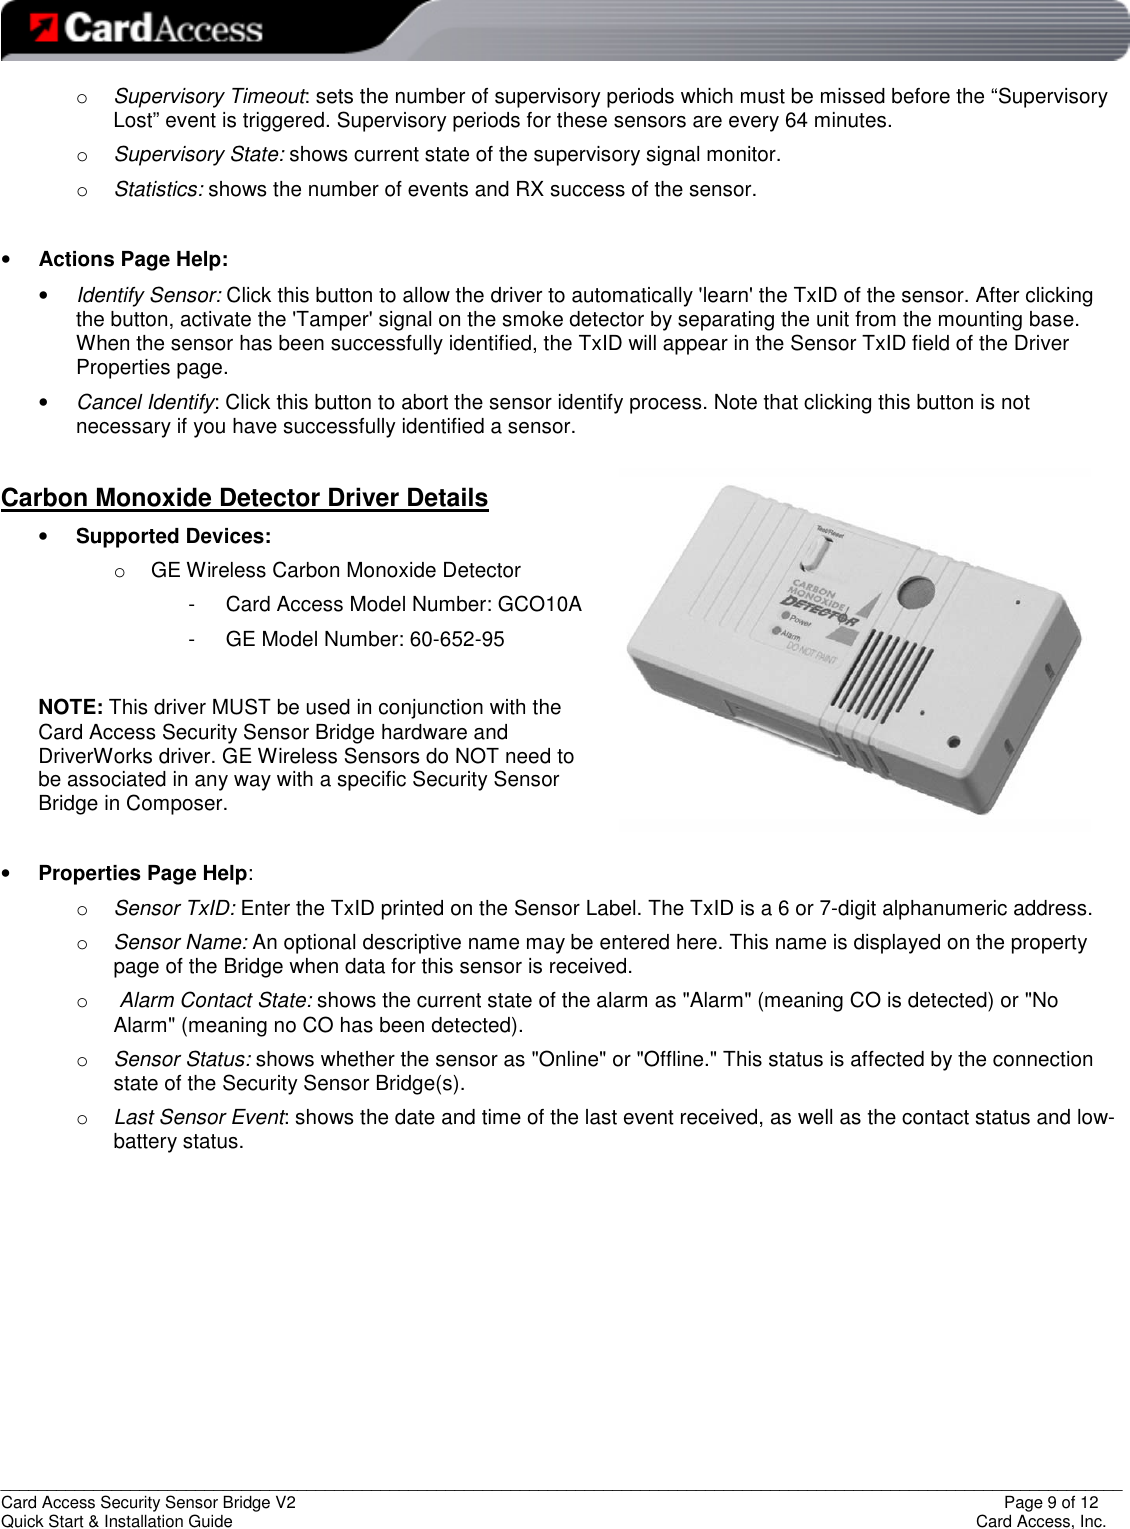   _________________________________________________________________________________________________________________________ Card Access Security Sensor Bridge V2                  Page 9 of 12 Quick Start &amp; Installation Guide      Card Access, Inc. o Supervisory Timeout: sets the number of supervisory periods which must be missed before the “Supervisory Lost” event is triggered. Supervisory periods for these sensors are every 64 minutes. o Supervisory State: shows current state of the supervisory signal monitor. o Statistics: shows the number of events and RX success of the sensor.  • Actions Page Help: • Identify Sensor: Click this button to allow the driver to automatically &apos;learn&apos; the TxID of the sensor. After clicking the button, activate the &apos;Tamper&apos; signal on the smoke detector by separating the unit from the mounting base. When the sensor has been successfully identified, the TxID will appear in the Sensor TxID field of the Driver Properties page.  • Cancel Identify: Click this button to abort the sensor identify process. Note that clicking this button is not necessary if you have successfully identified a sensor.  Carbon Monoxide Detector Driver Details  • Supported Devices:  o  GE Wireless Carbon Monoxide Detector -  Card Access Model Number: GCO10A -  GE Model Number: 60-652-95  NOTE: This driver MUST be used in conjunction with the Card Access Security Sensor Bridge hardware and DriverWorks driver. GE Wireless Sensors do NOT need to be associated in any way with a specific Security Sensor Bridge in Composer.  • Properties Page Help: o Sensor TxID: Enter the TxID printed on the Sensor Label. The TxID is a 6 or 7-digit alphanumeric address. o Sensor Name: An optional descriptive name may be entered here. This name is displayed on the property page of the Bridge when data for this sensor is received. o  Alarm Contact State: shows the current state of the alarm as &quot;Alarm&quot; (meaning CO is detected) or &quot;No Alarm&quot; (meaning no CO has been detected). o Sensor Status: shows whether the sensor as &quot;Online&quot; or &quot;Offline.&quot; This status is affected by the connection state of the Security Sensor Bridge(s). o Last Sensor Event: shows the date and time of the last event received, as well as the contact status and low-battery status.         